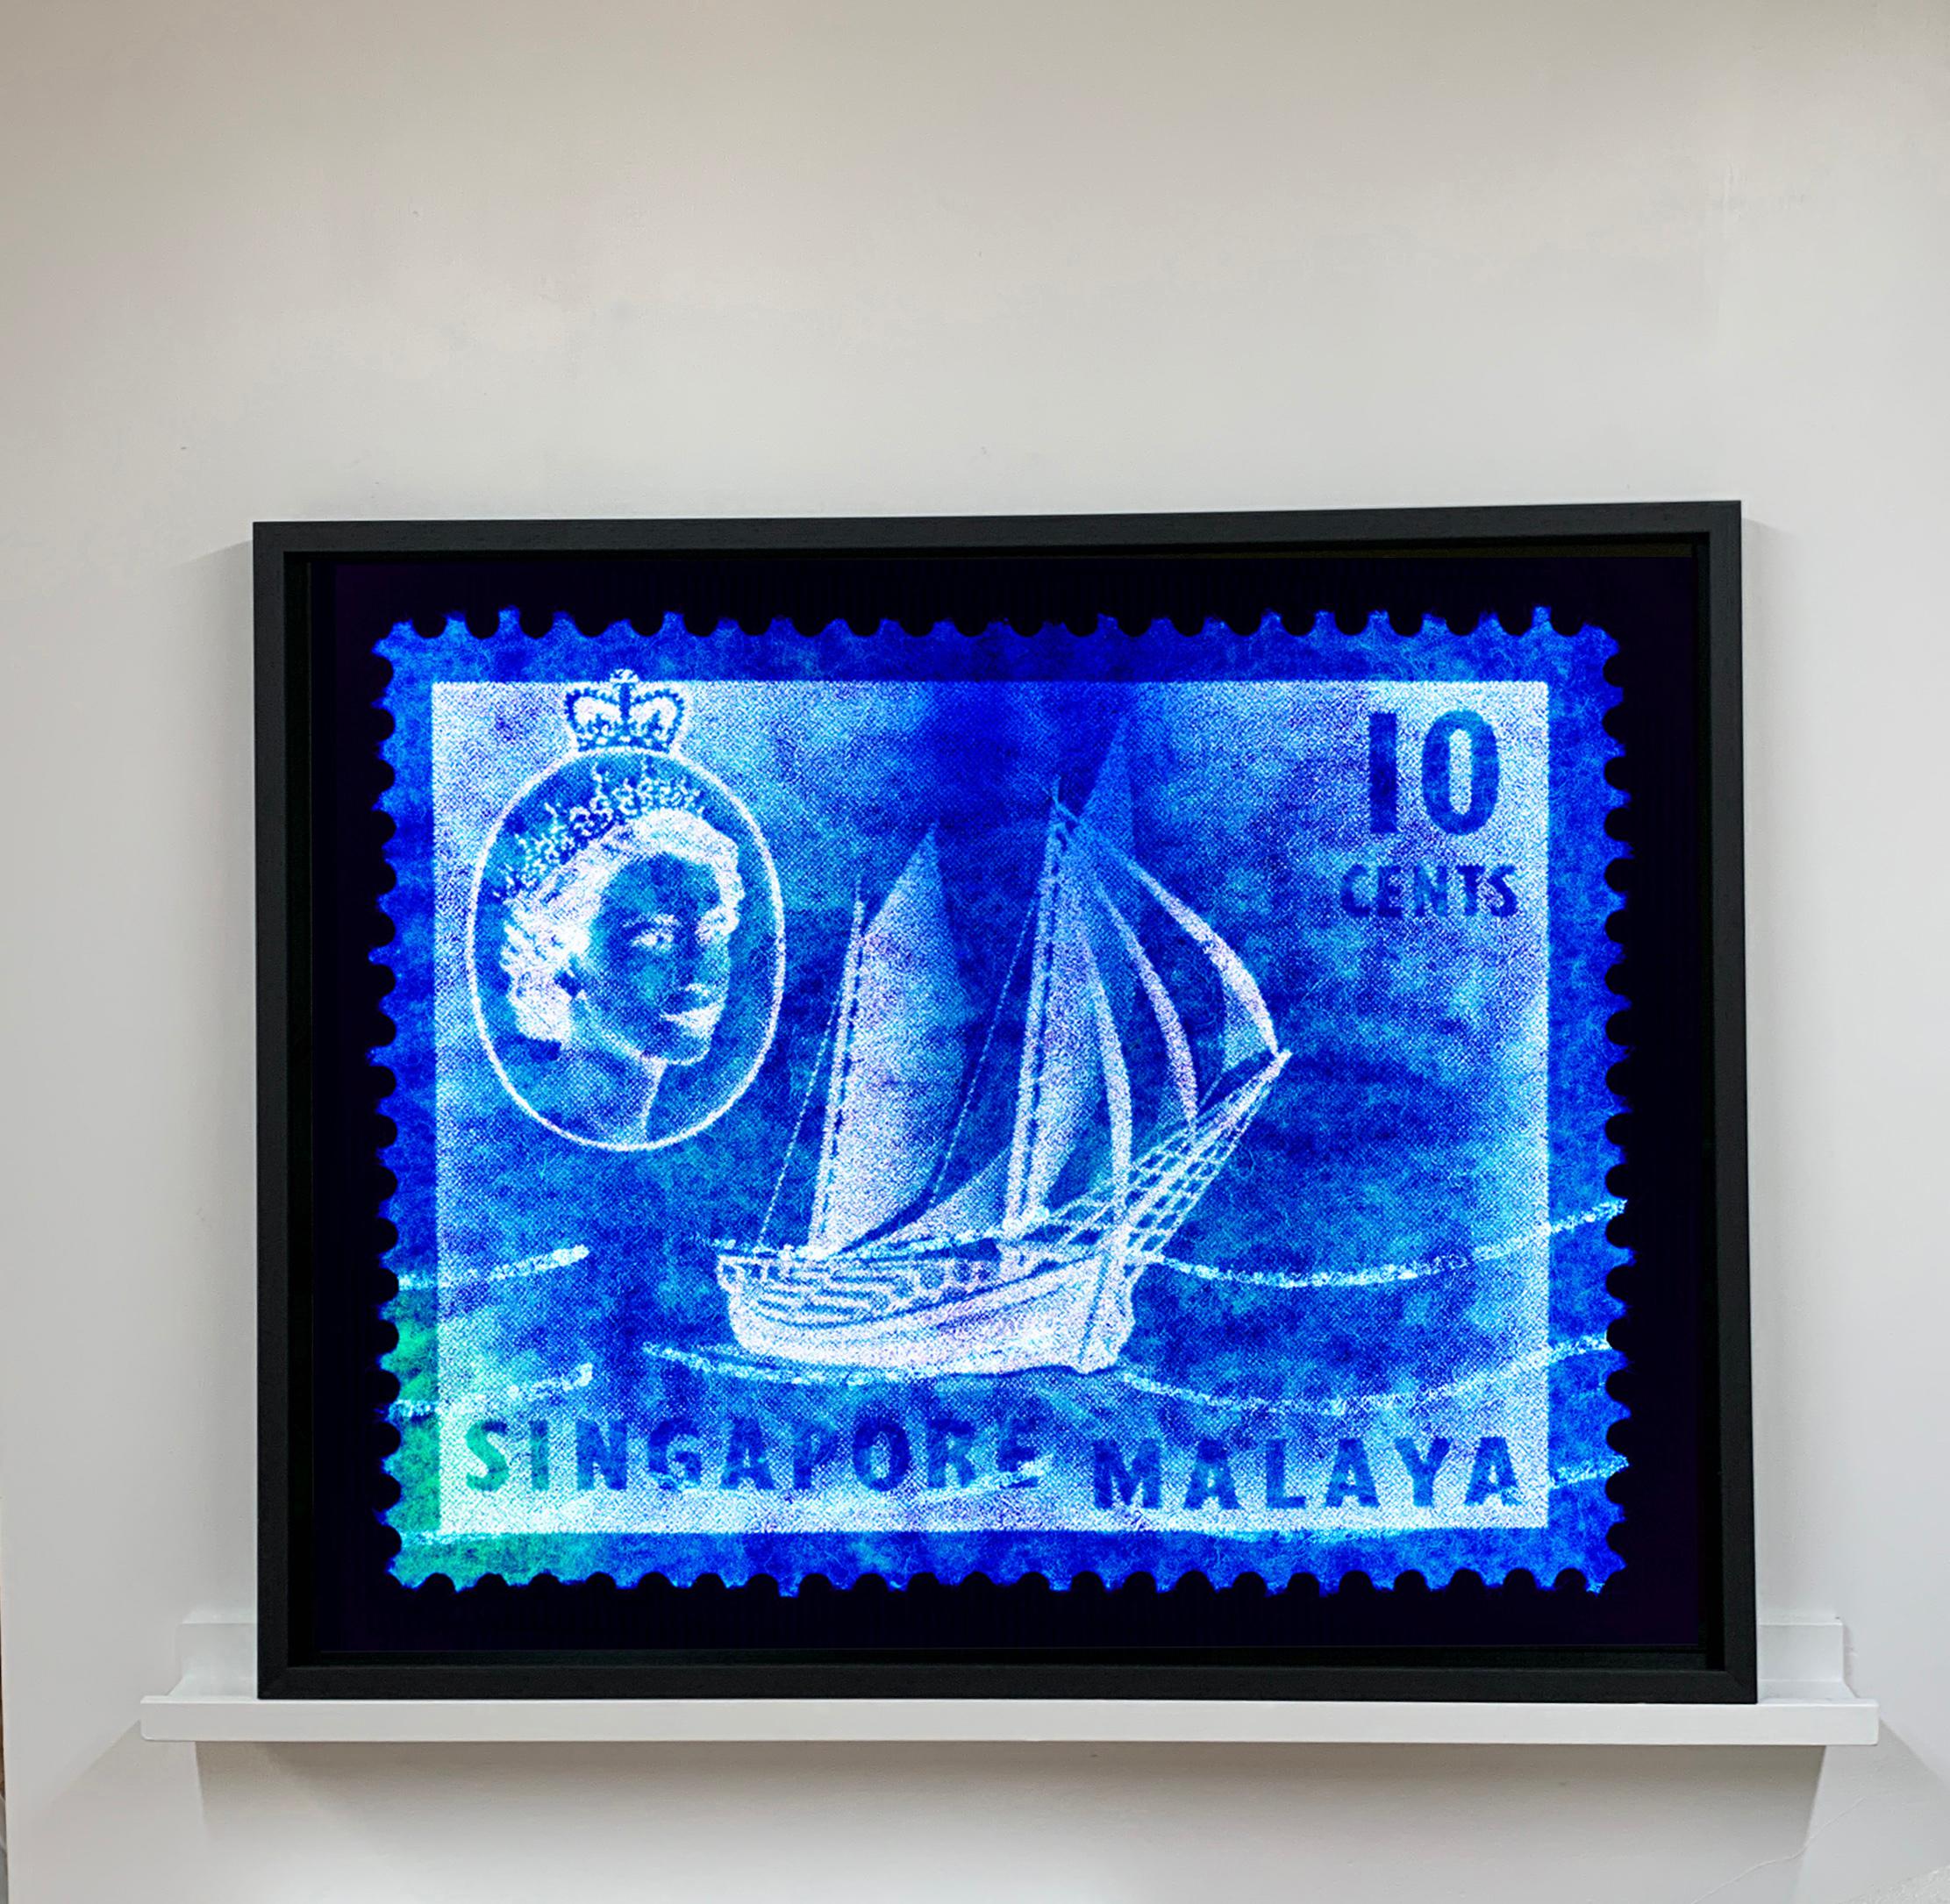 Singapore Stamp Collection, 10 Cents QEII Ship Series Blue - Pop Art Color Photo - Photograph by Heidler & Heeps